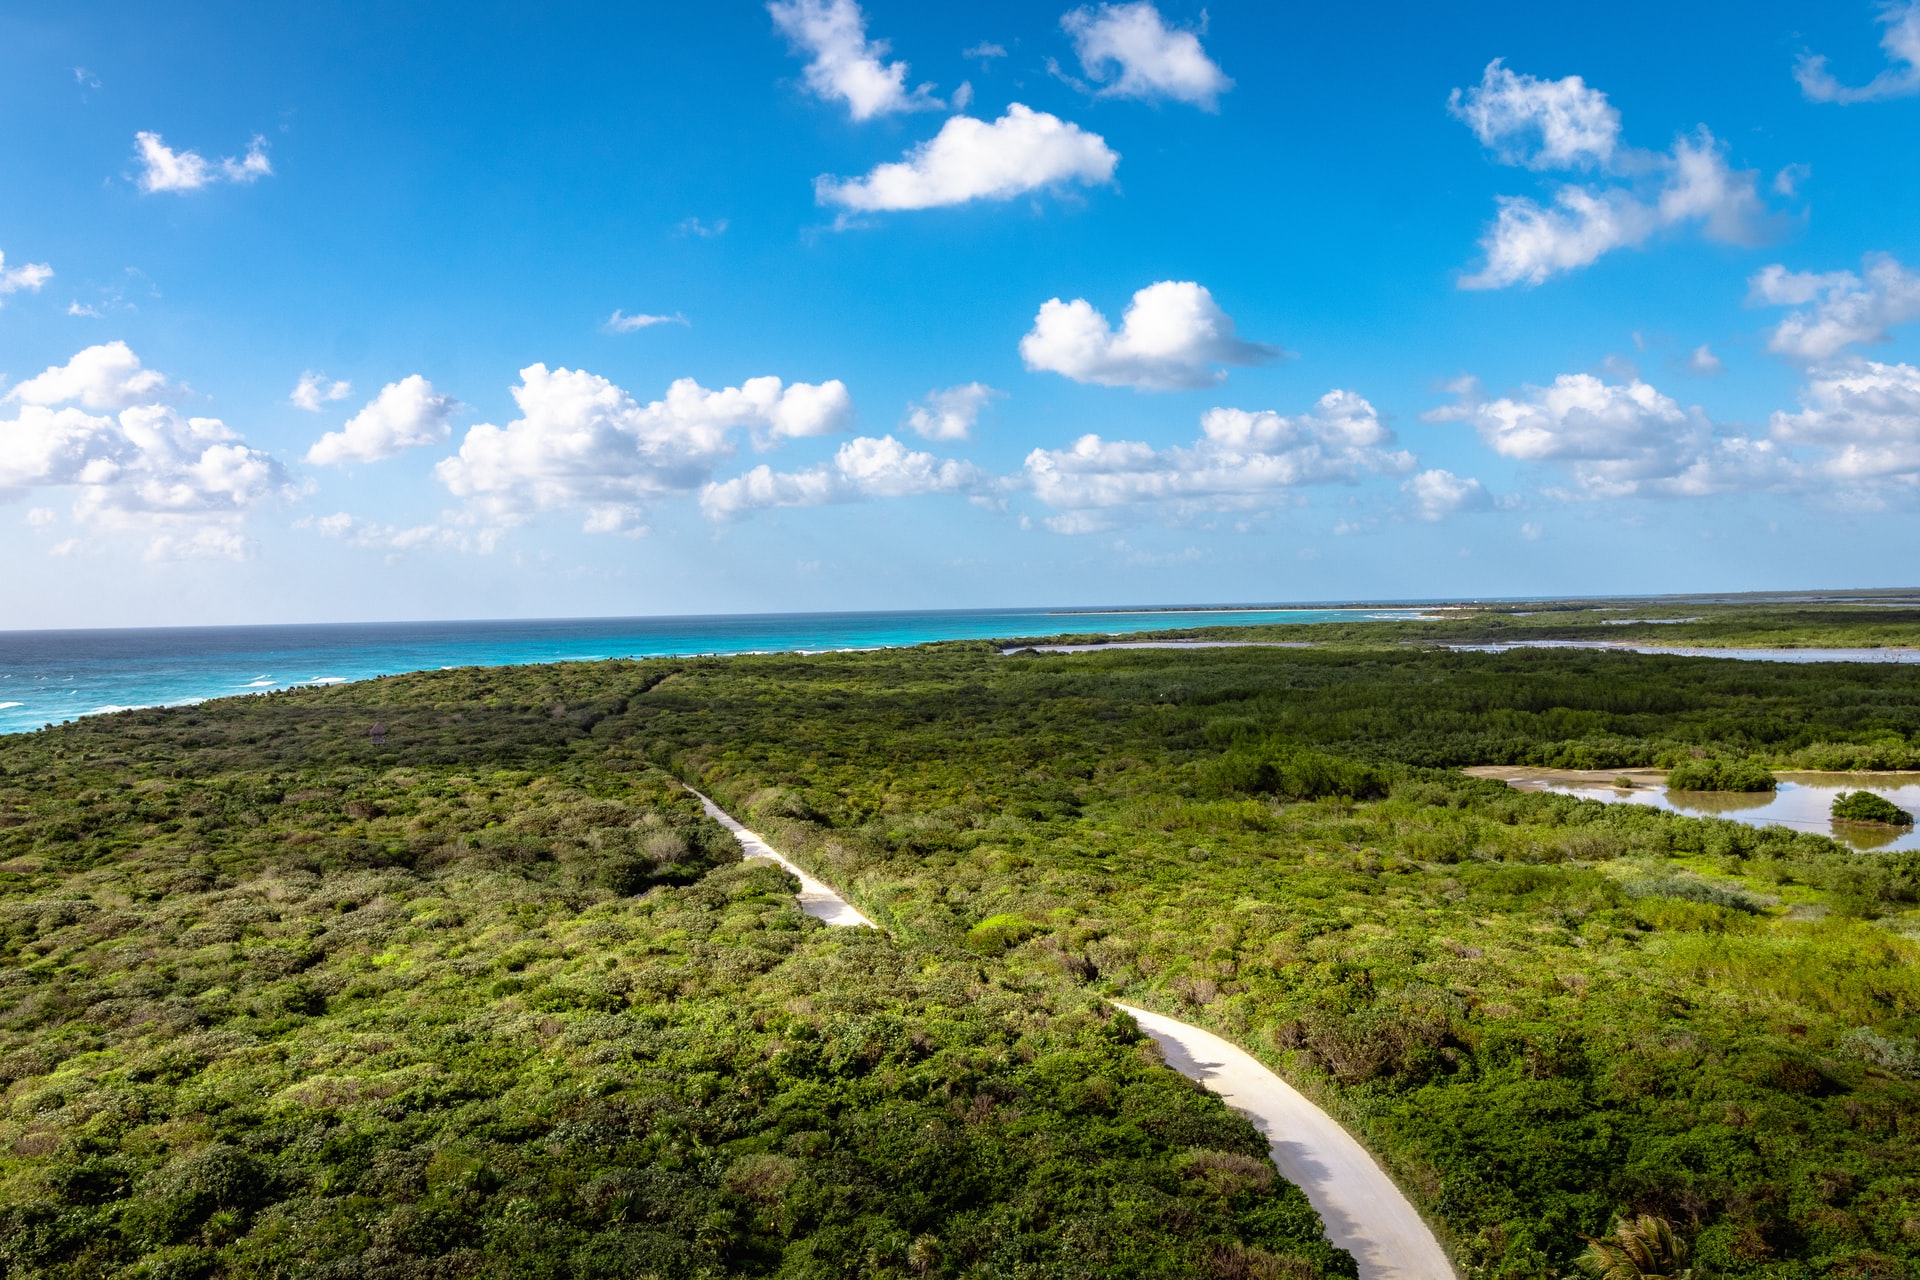 cozumel island from overhead view